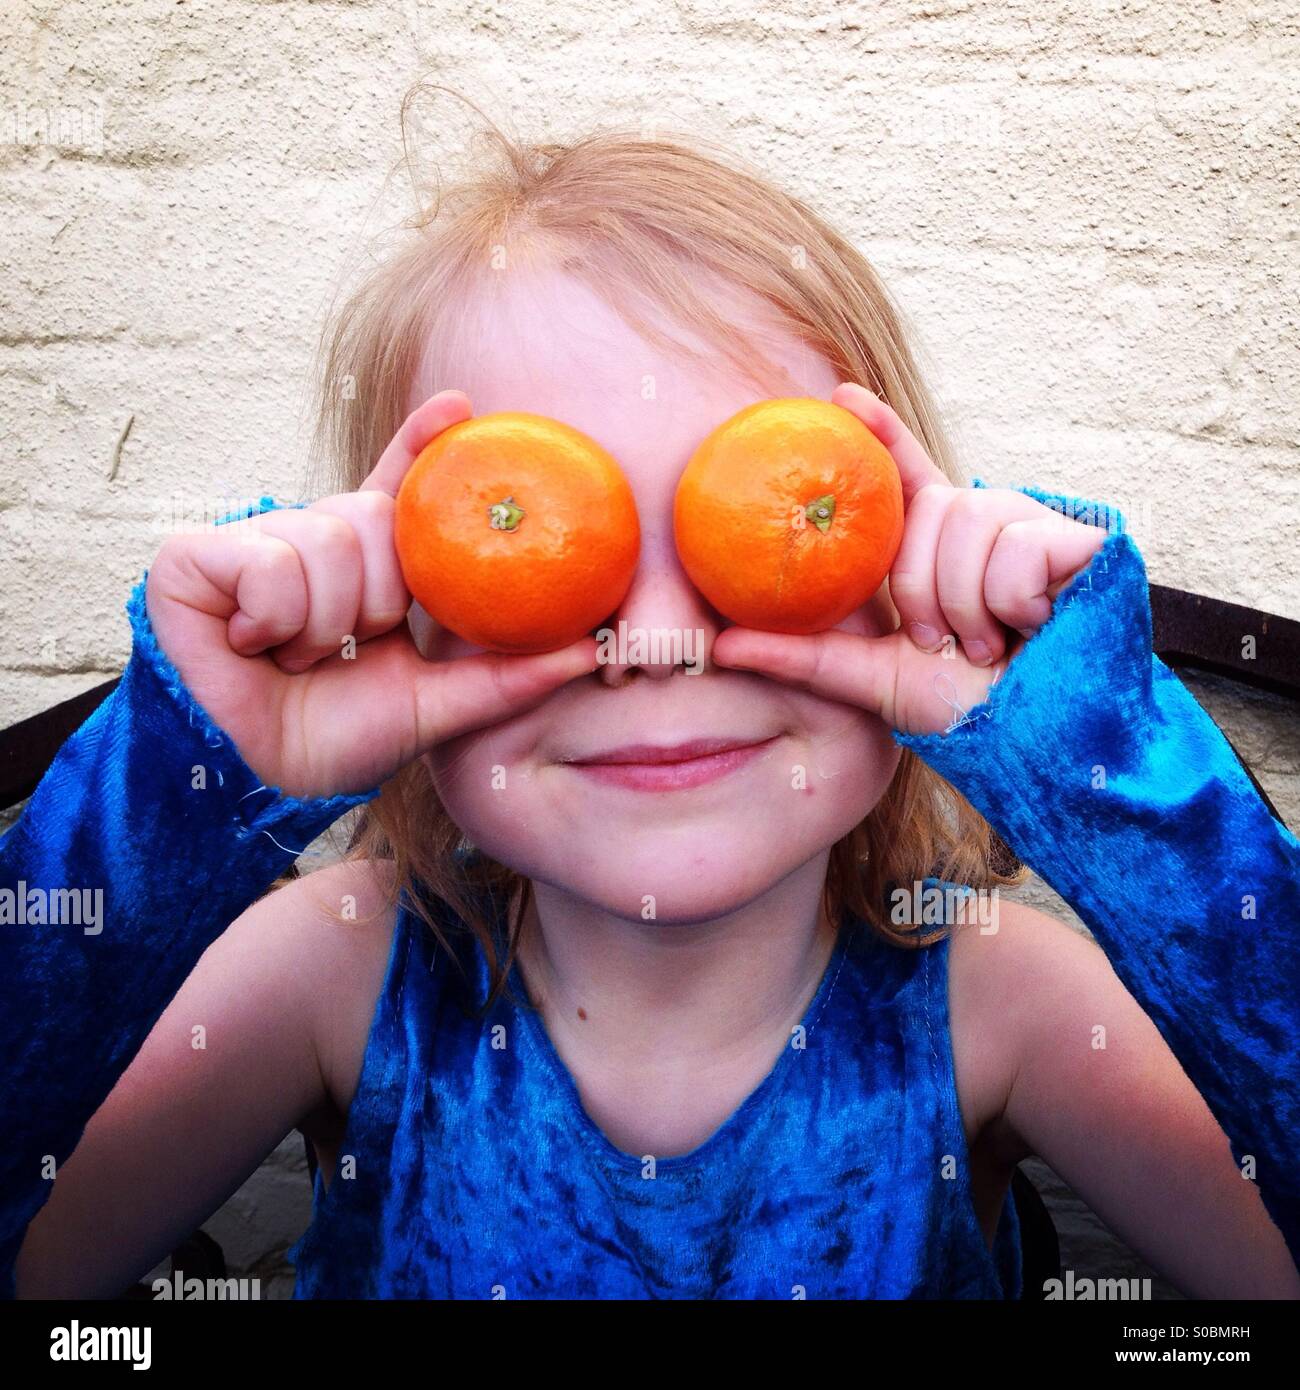 Happy child with oranges as eyes. Girl holding too soft oranges over her eyes. Stock Photo